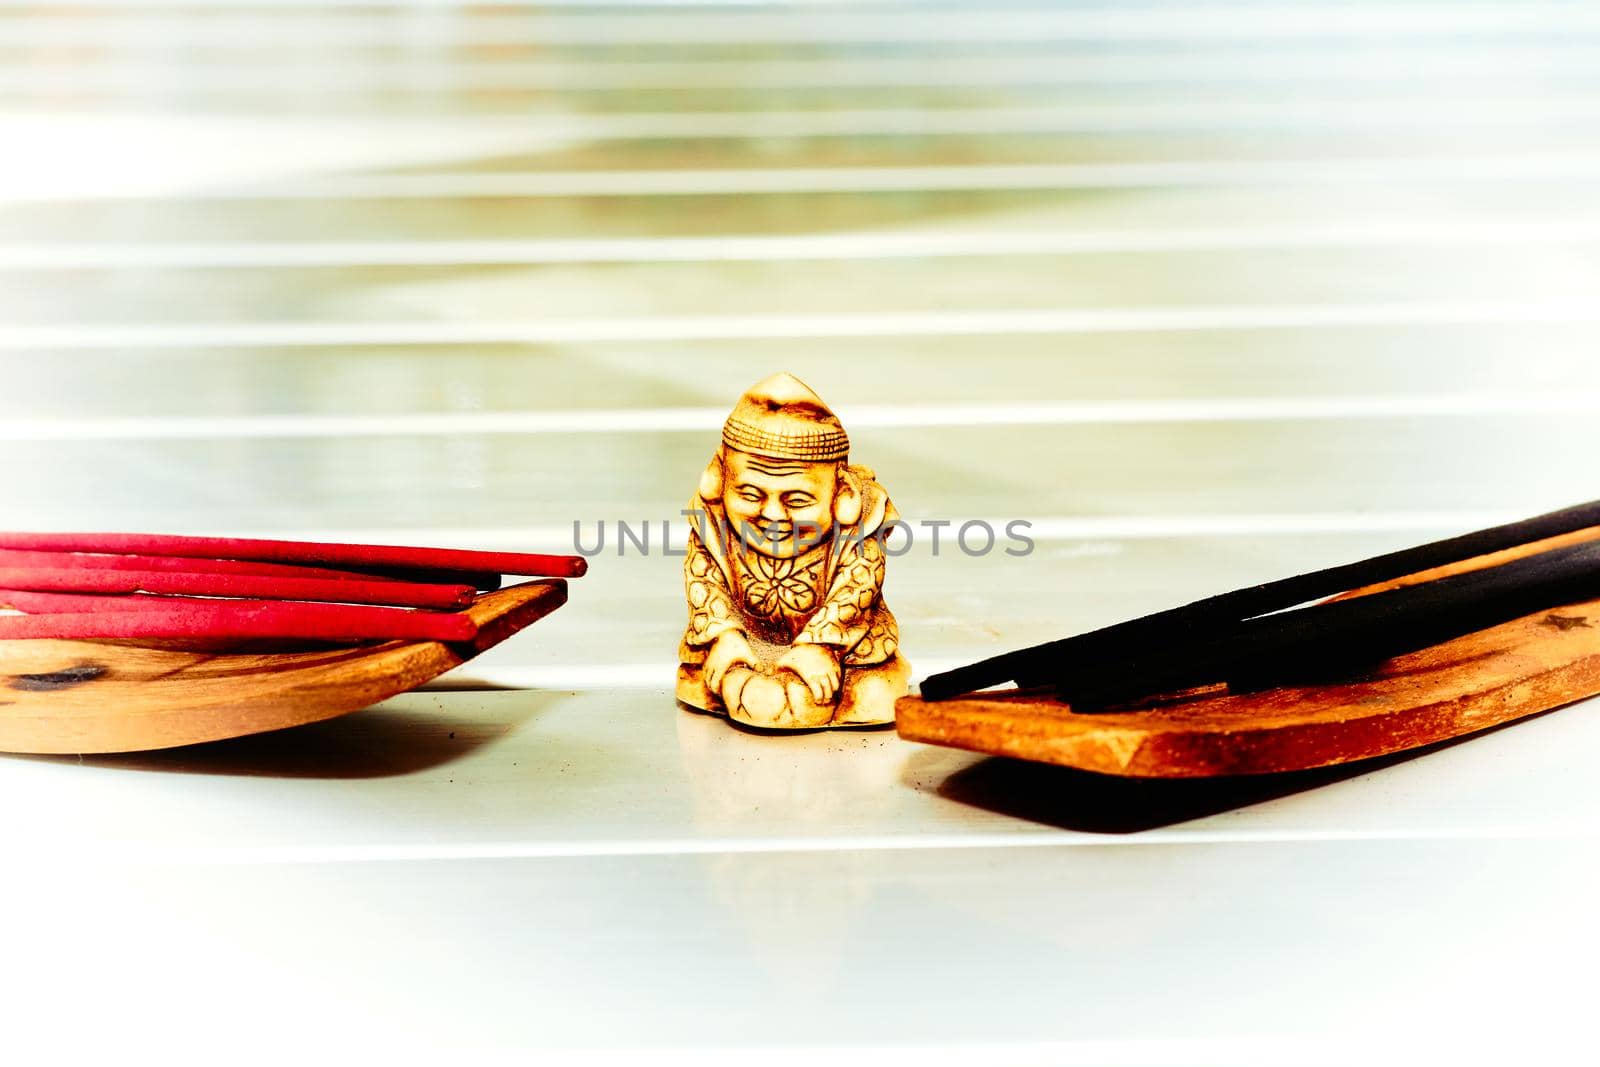 Think deeply or focus ones mind for a period of time, in silence, for religious or spiritual purposes or as a method of relaxation.Statuette of a Buddhist monk among incense